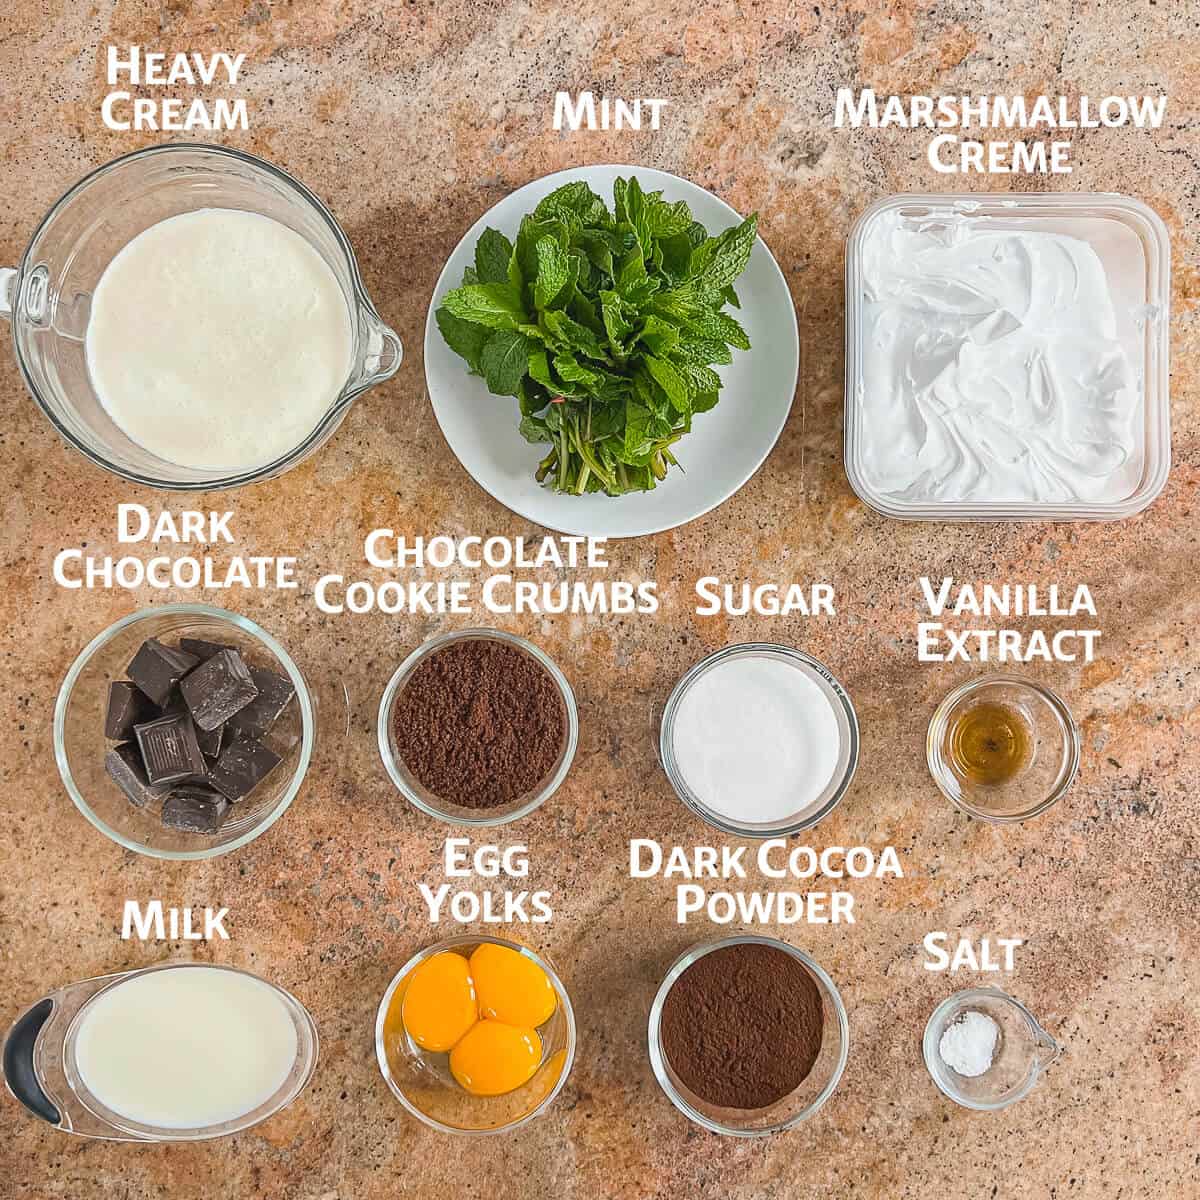 Chocolate Mint Marshmallow Ice Cream ingredients portioned into glass bowls from overhead.